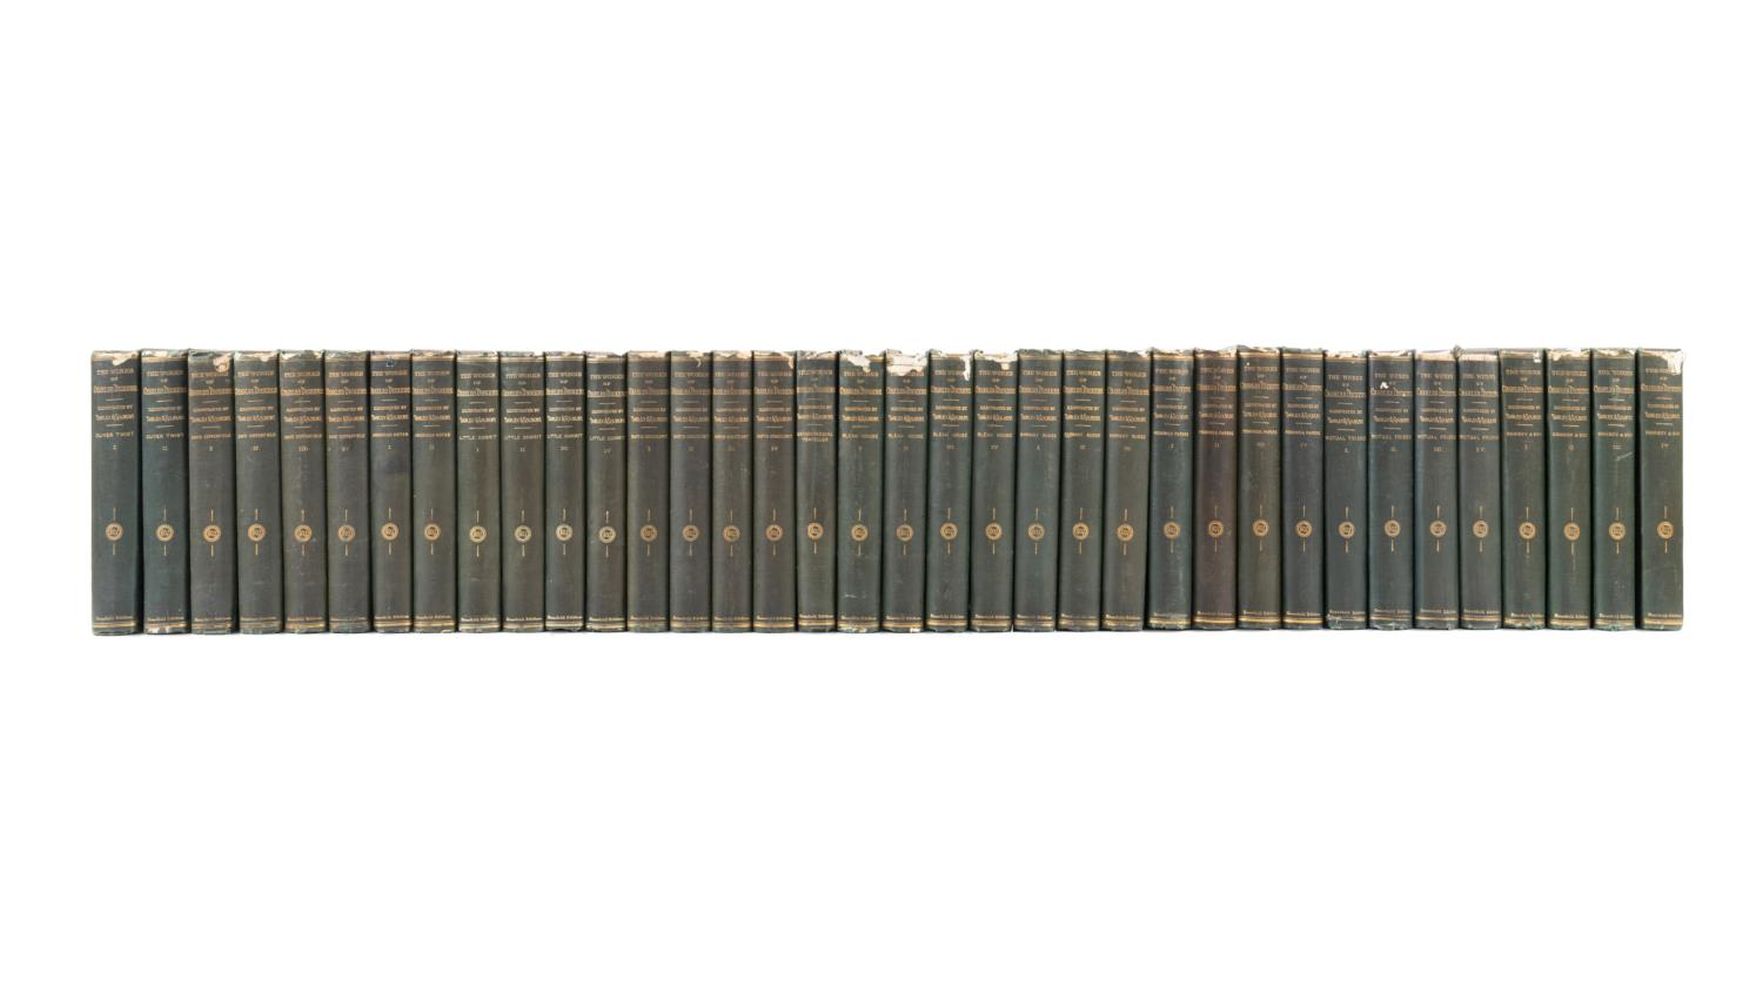 36VOL CHARLES DICKENS COLLECTED 3cd52e